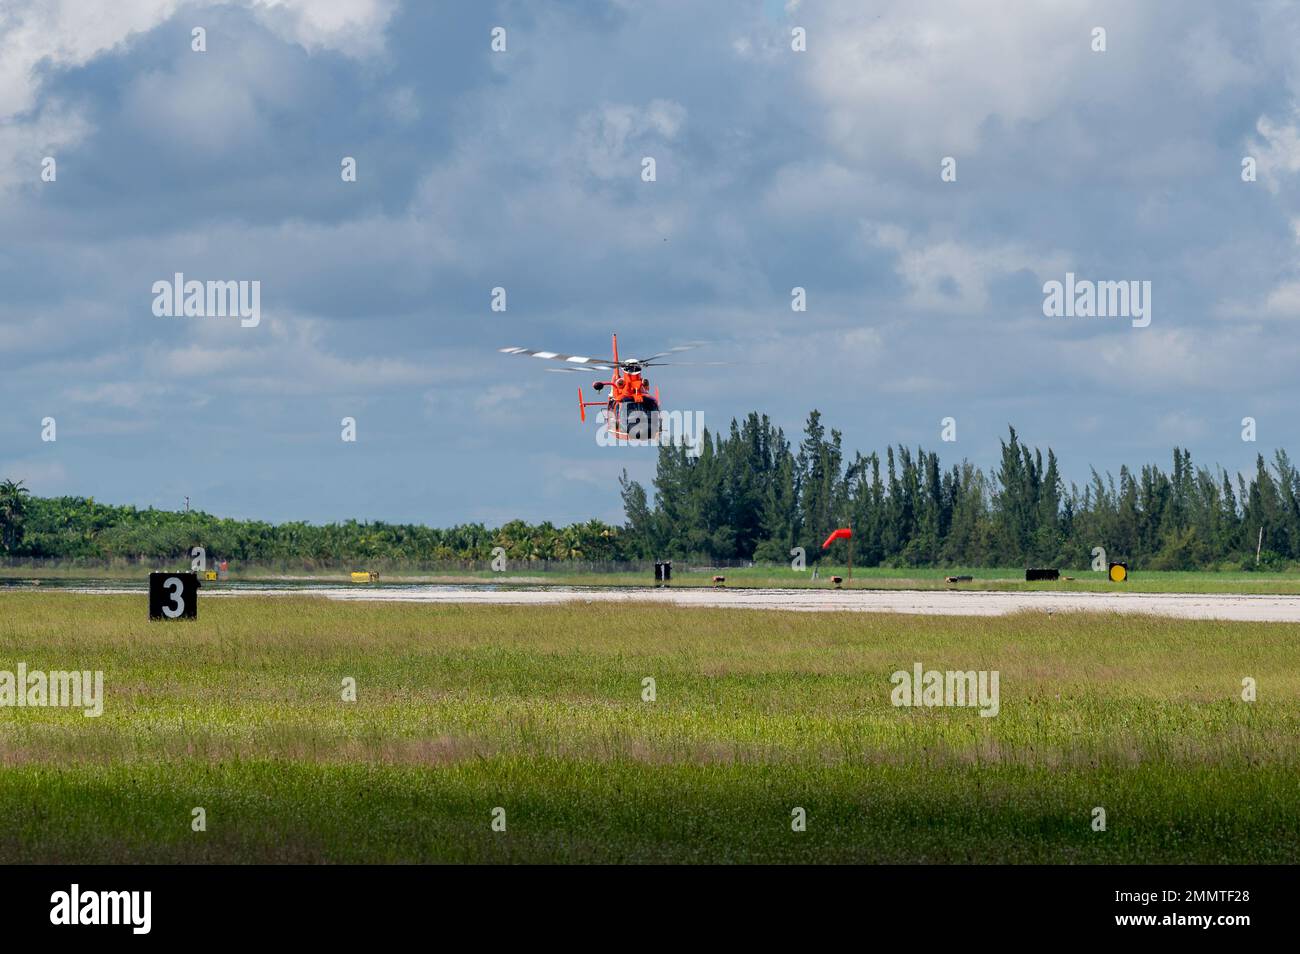 United States Coast Guard MH-65 Dolphin helicopter from Coast Guard Air Station Miami, training at Homestead ARB. Stock Photo